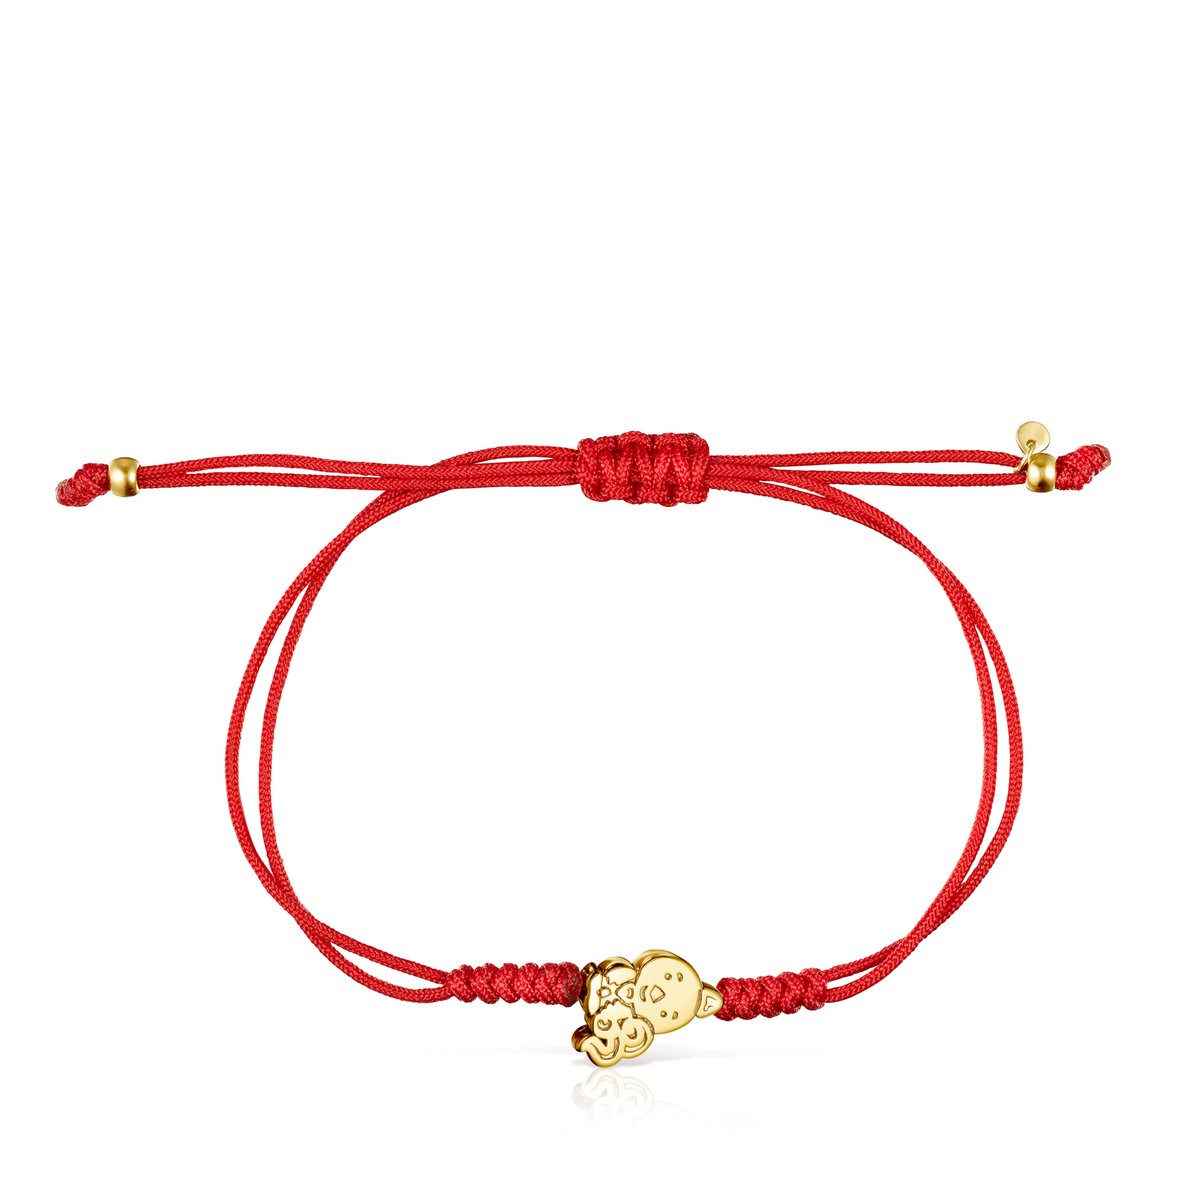 Tous Chinese Horoscope Rooster Bracelet in Gold and Red Cord 918431070 –